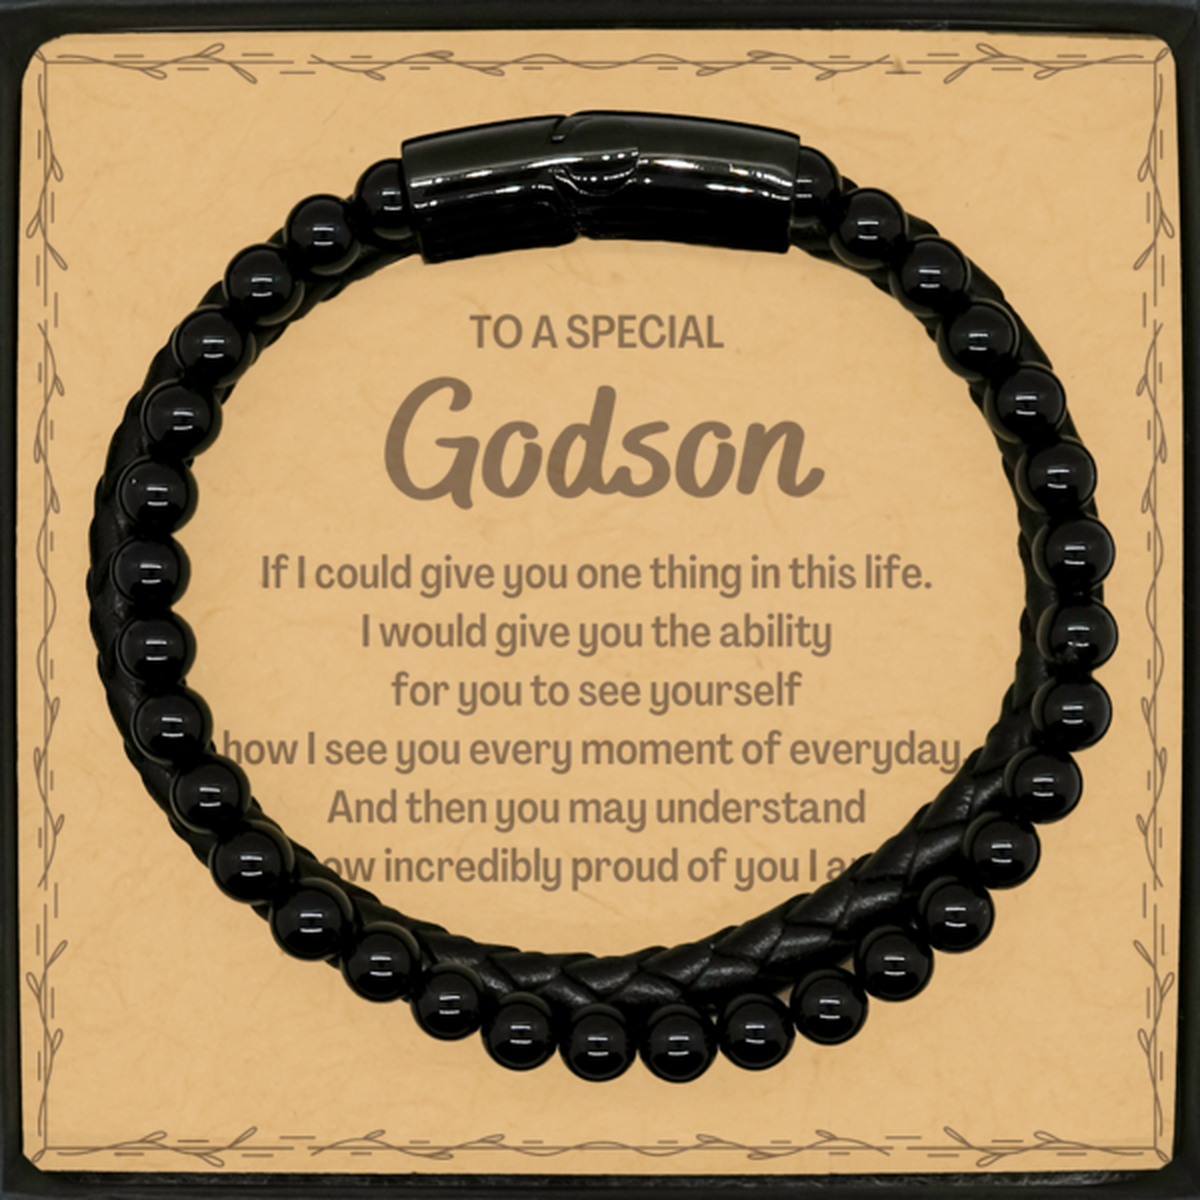 To My Godson Stone Leather Bracelets, Gifts For Godson Message Card, Inspirational Gifts for Christmas Birthday, Epic Gifts for Godson To A Special Godson how incredibly proud of you I am